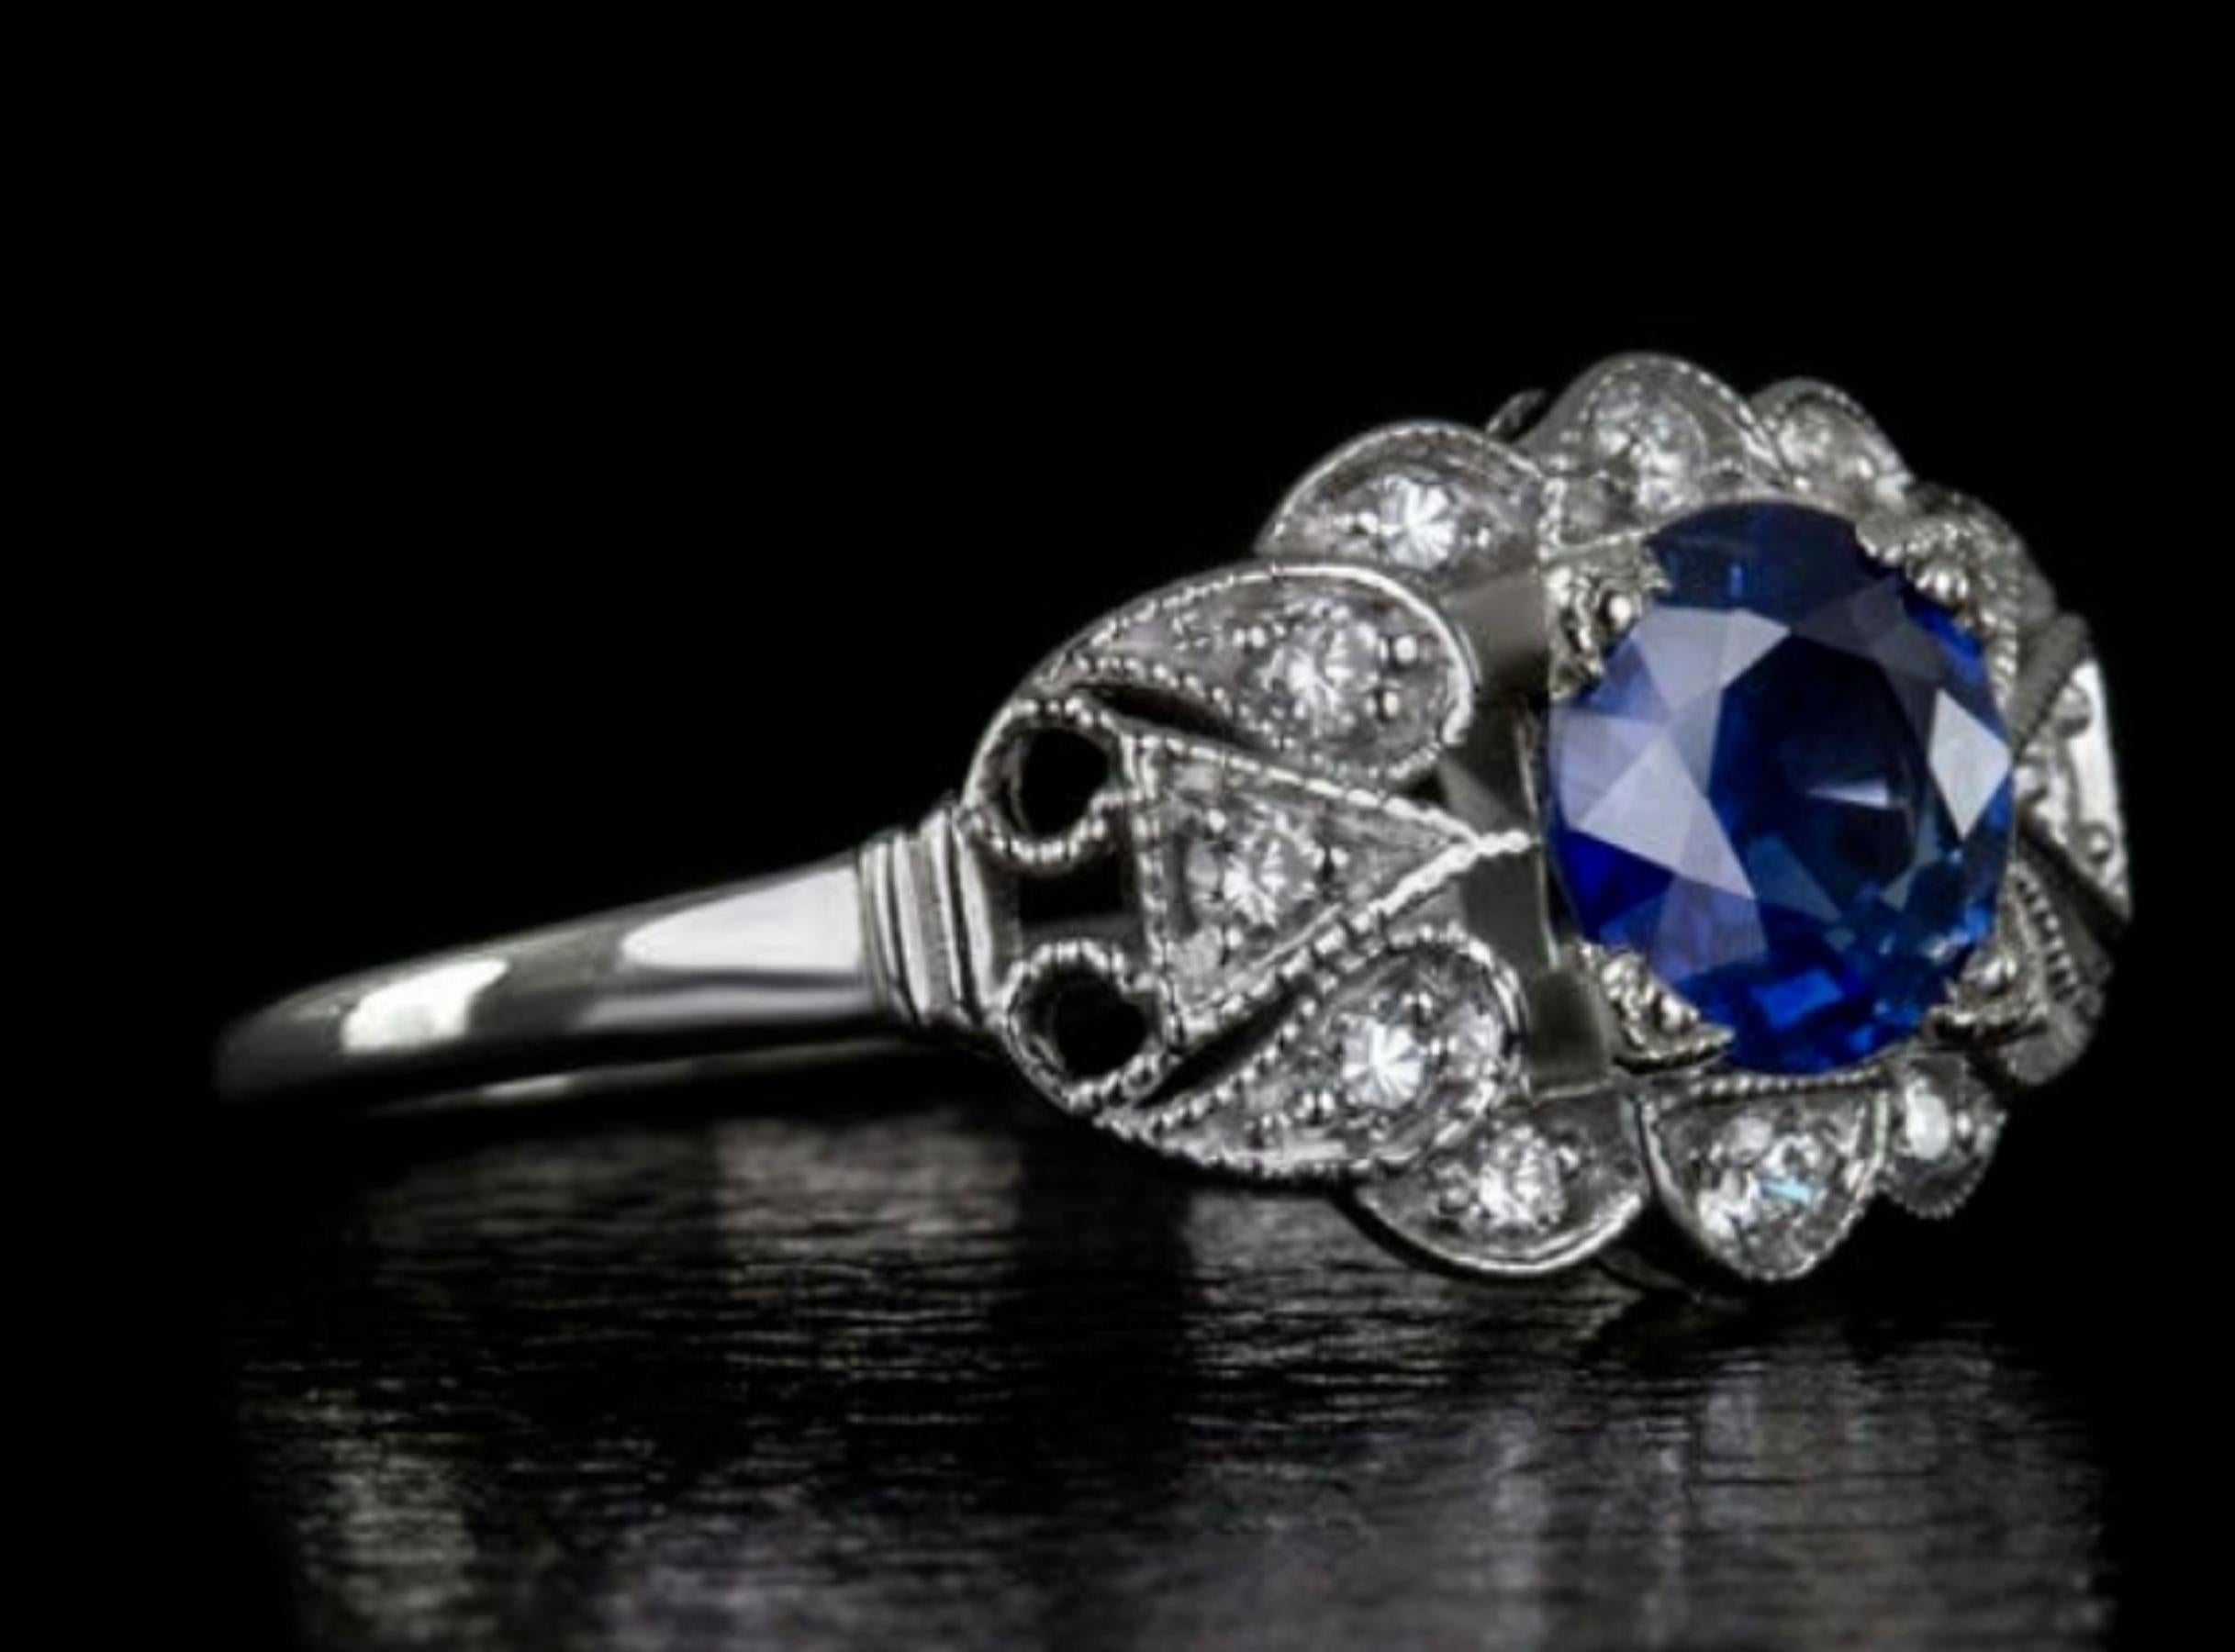 The sapphire has a gorgeous blue color that radiates in the light. 

The stone is complimented by 10 white diamonds which are free from any visible imperfections and have nice sparkle! This ring was inspired by a ring from the Art Deco era and has a